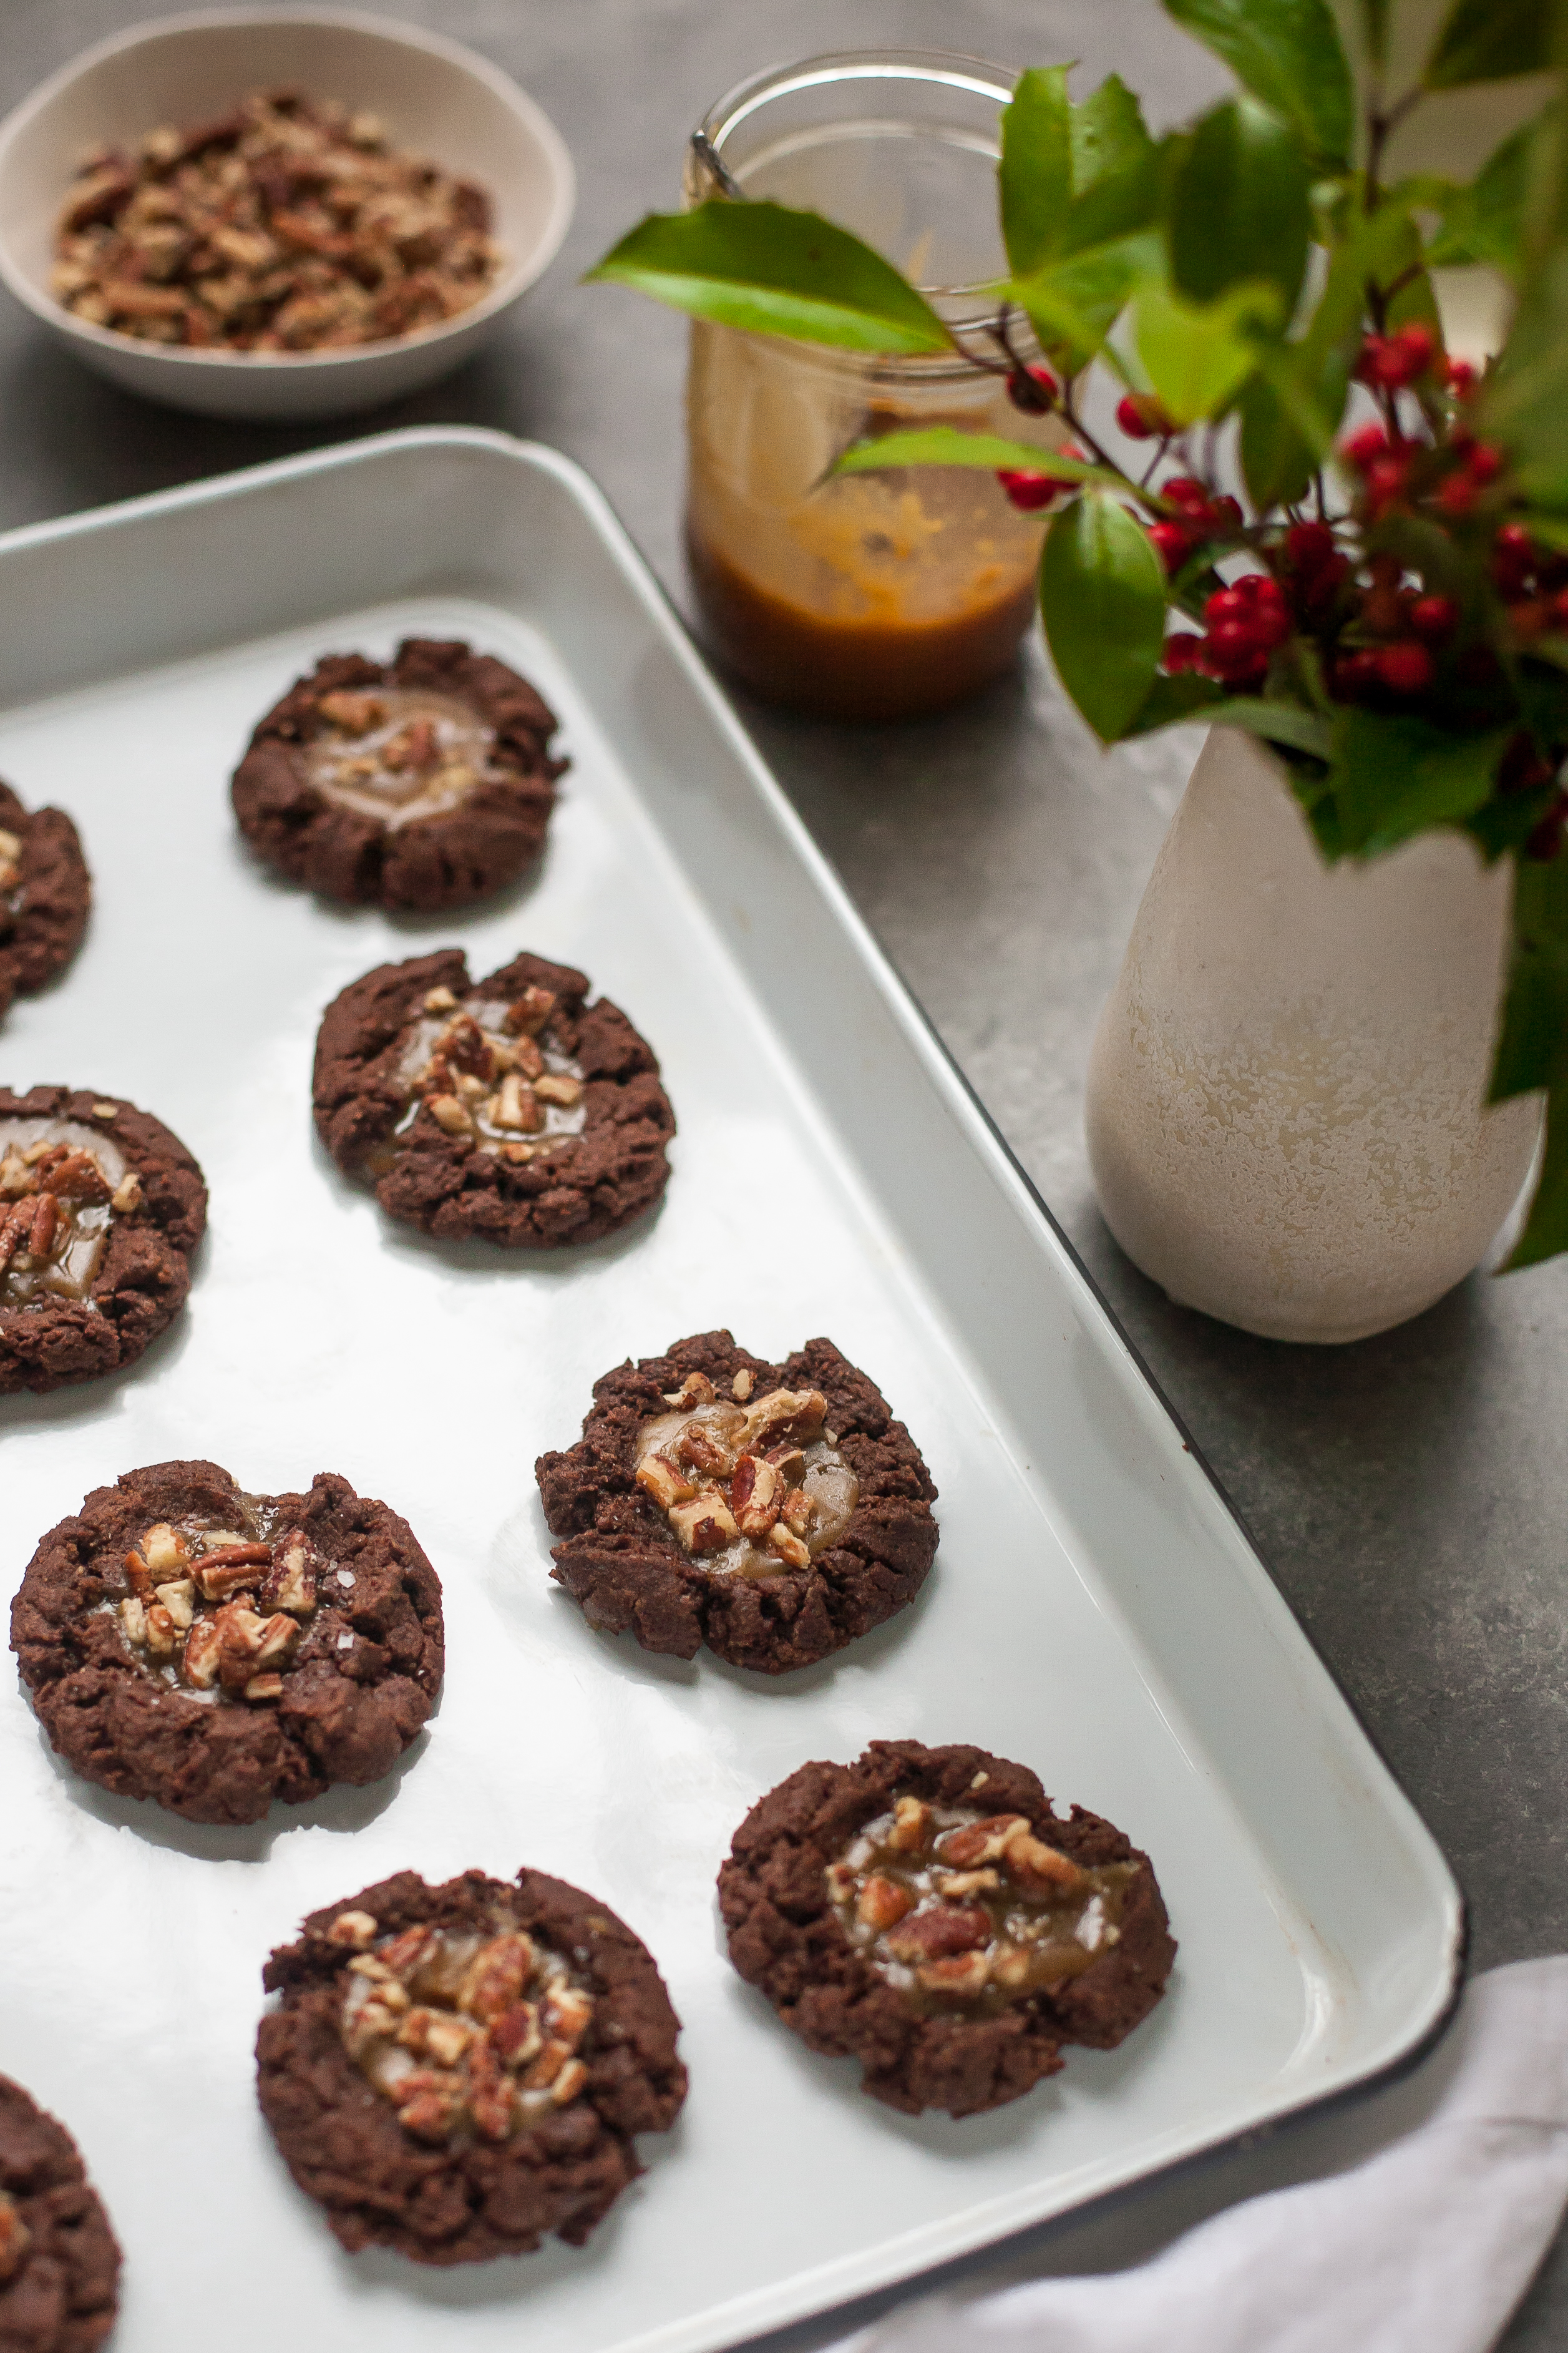 Chocolate Almond Butter Thumbprints with Maple Caramel (Gluten free, Grain free)